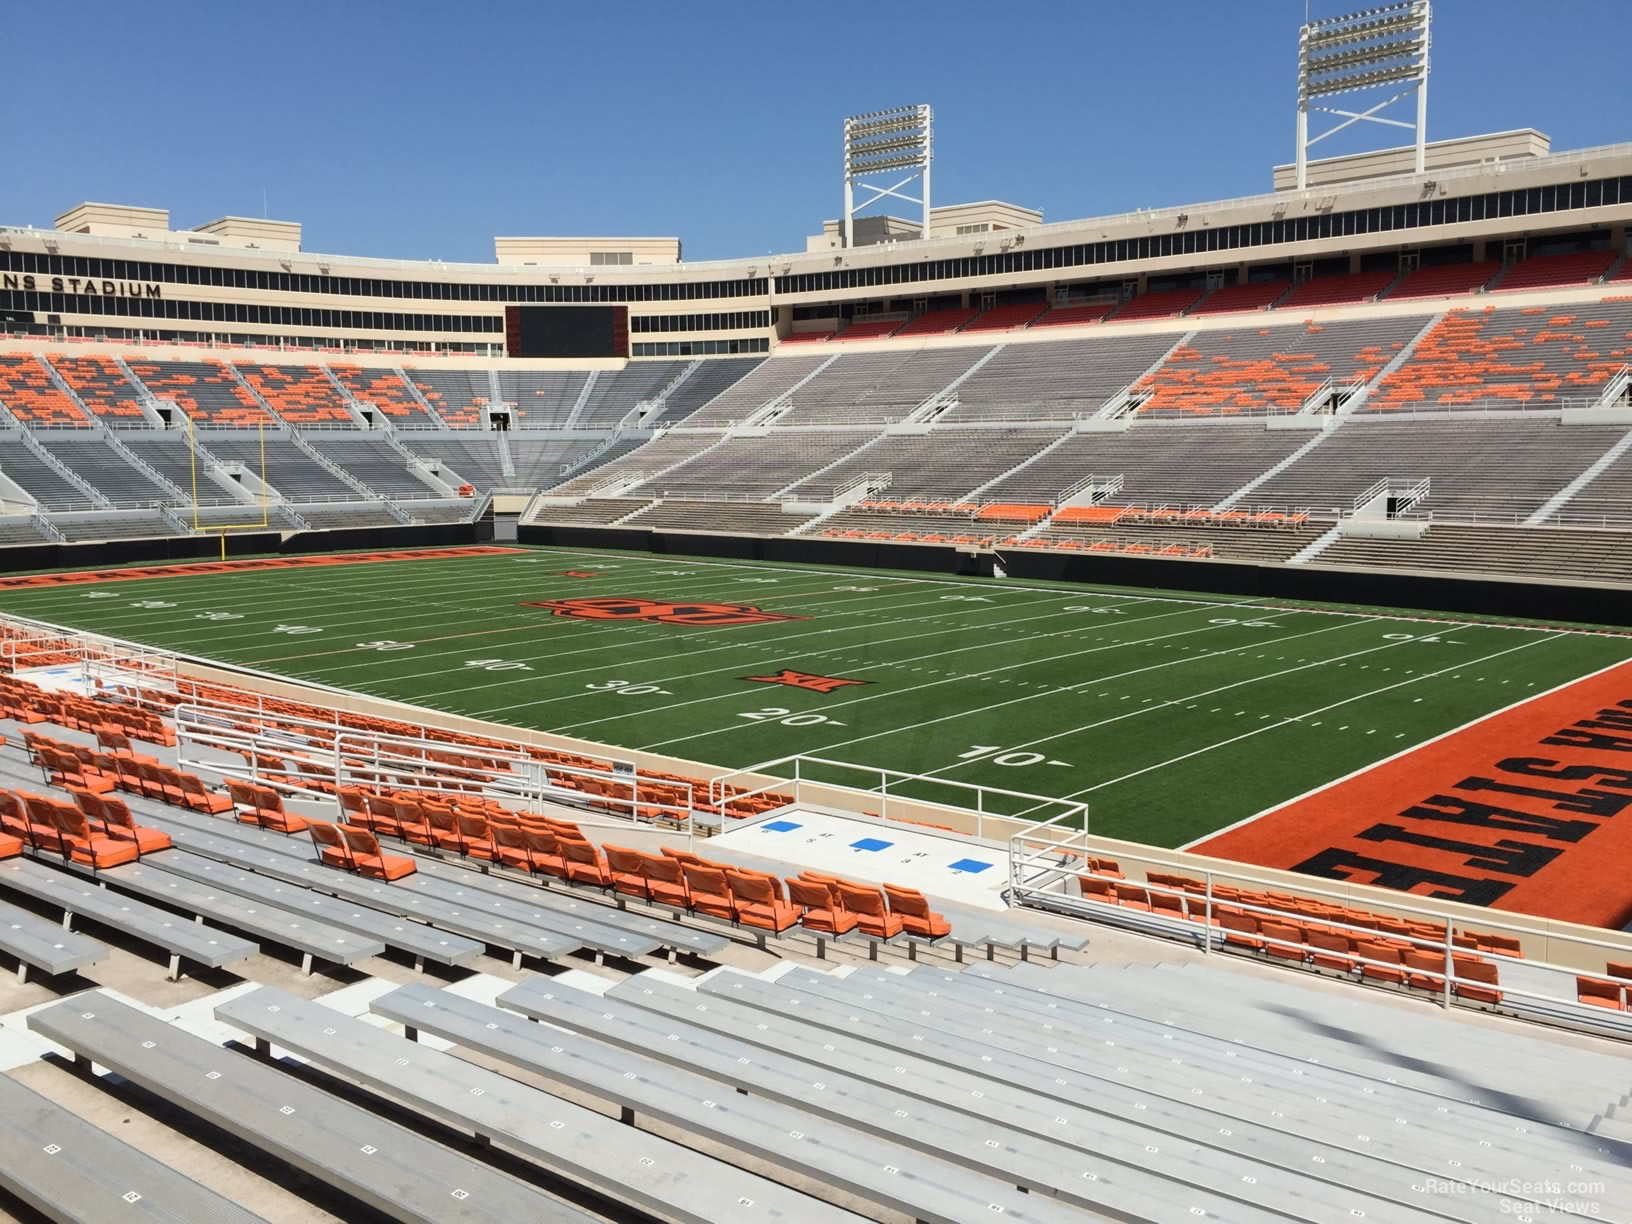 section 201, row 20 seat view  - boone pickens stadium